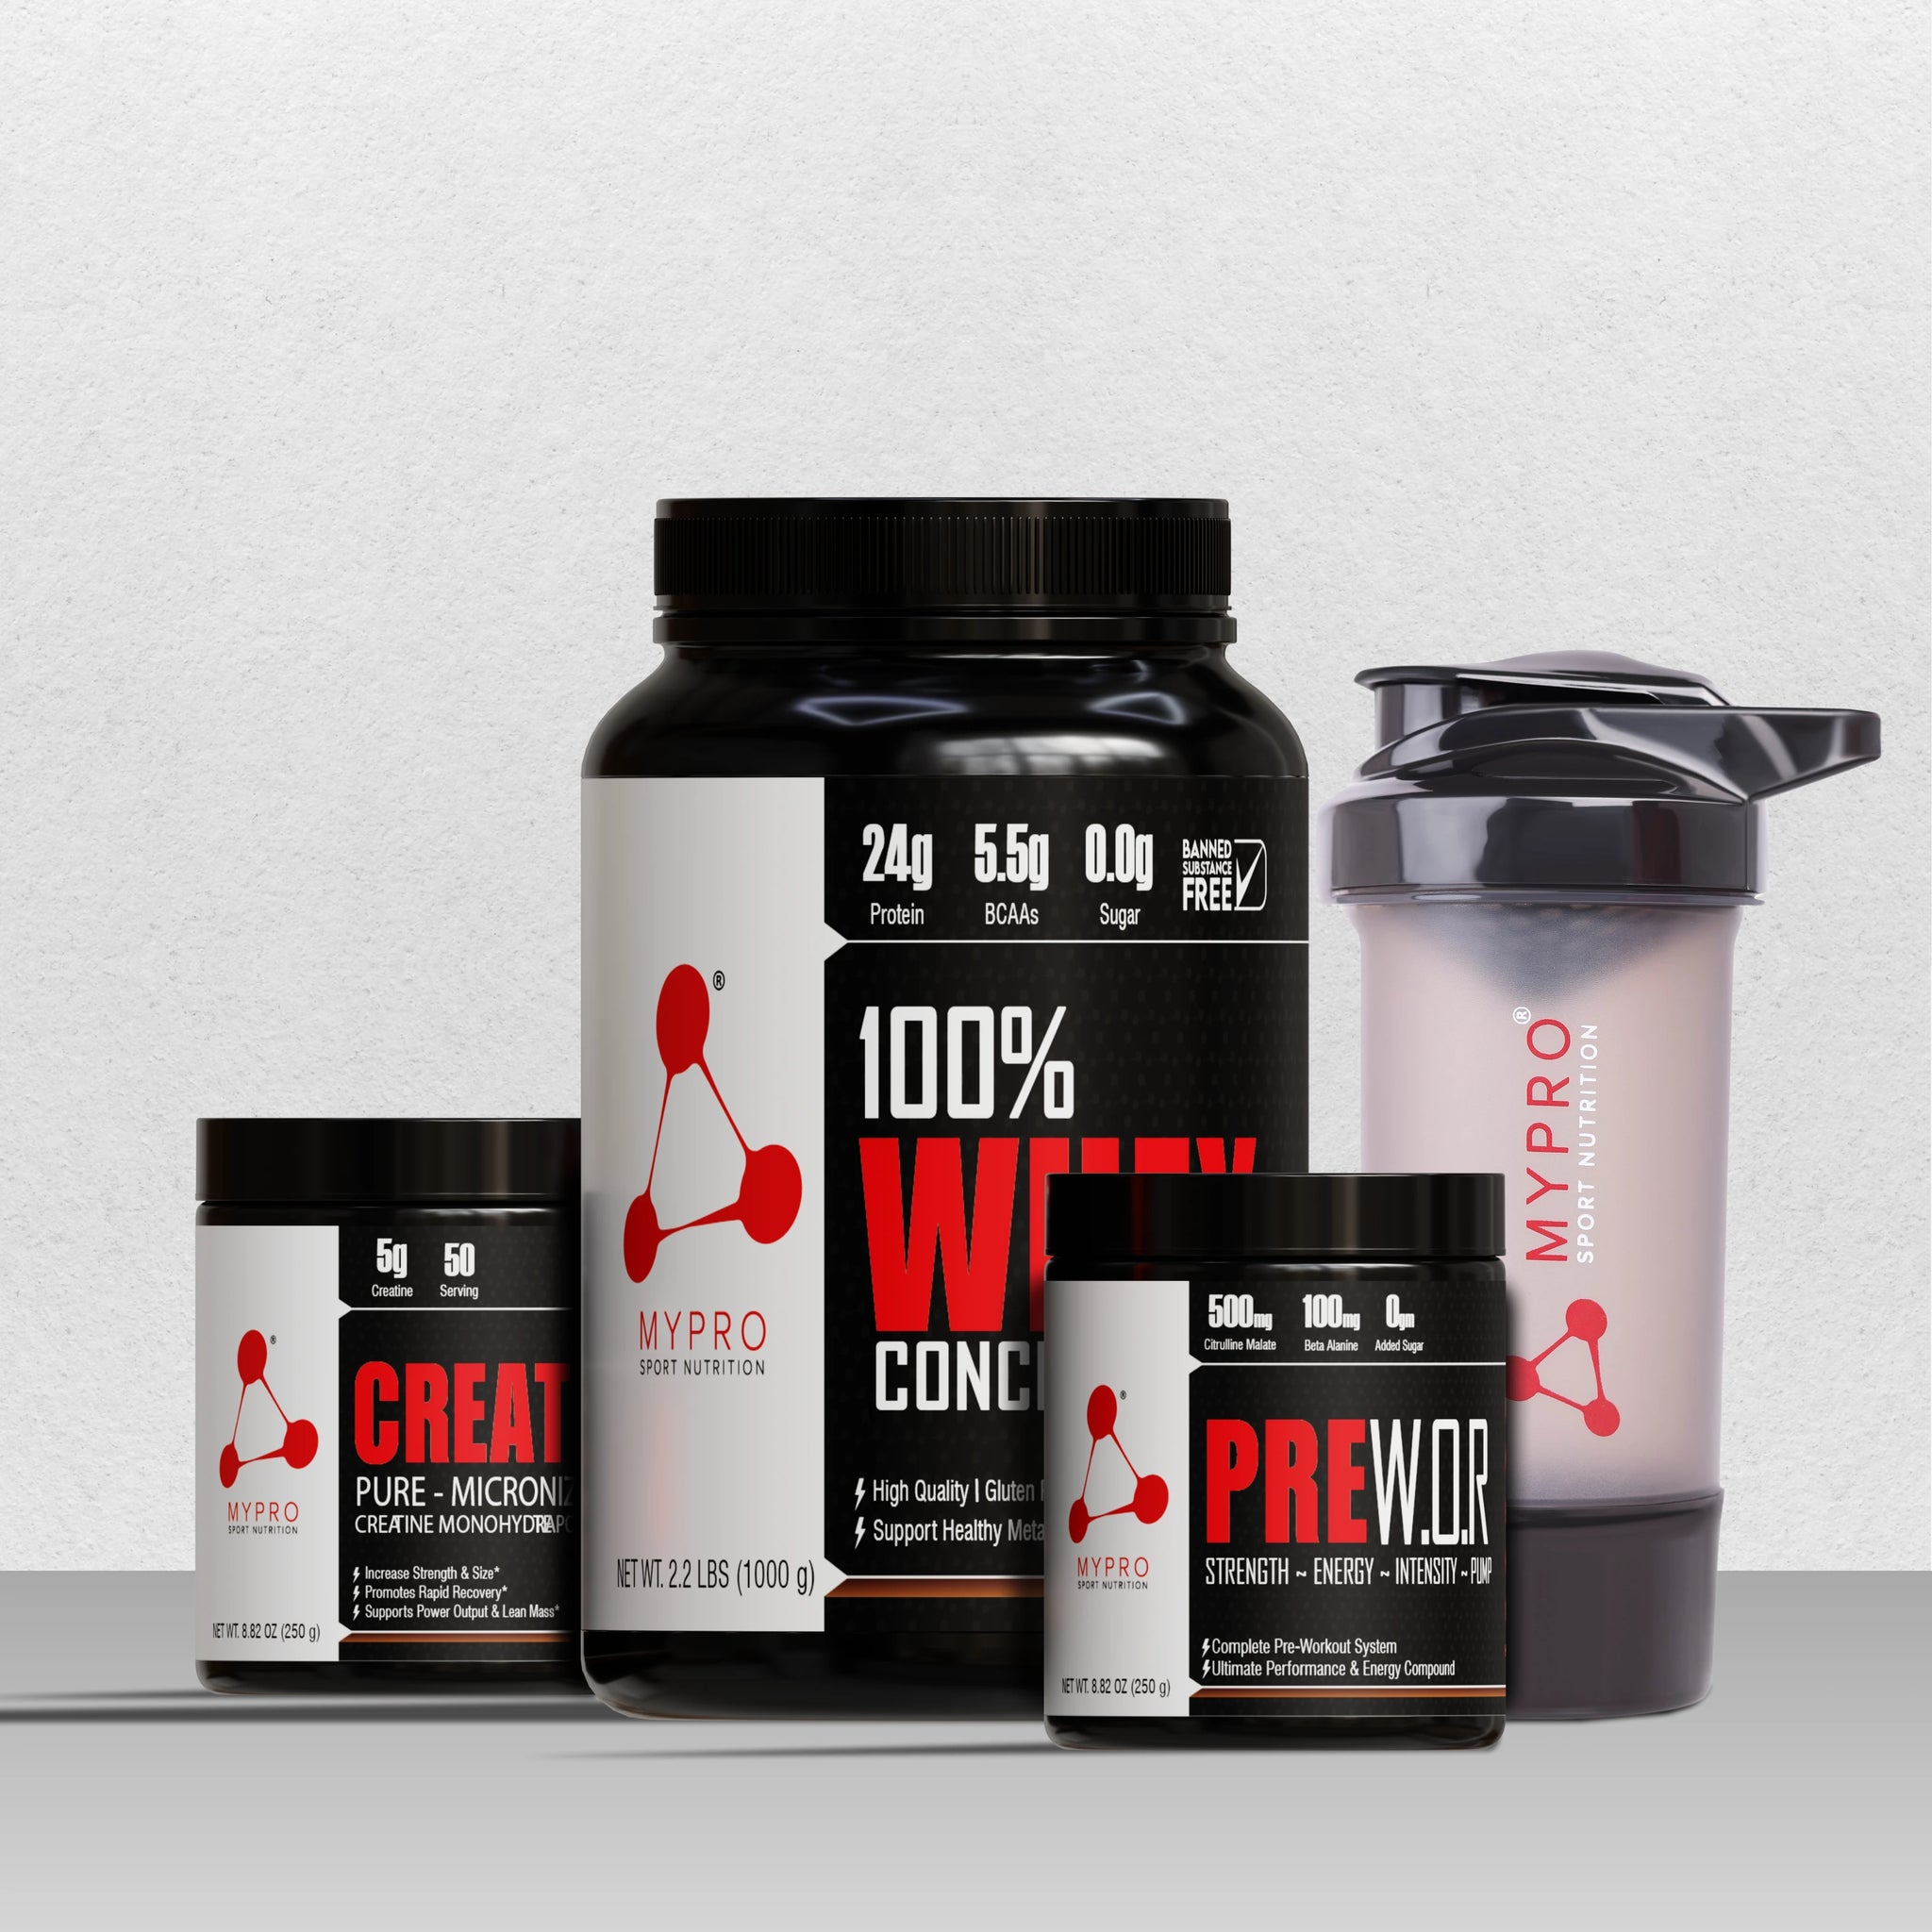 Combo of 100% Whey Protein Concentrate + Pre-Workout Powder + Creatine Pure Micronized & Gym Shaker Bottle